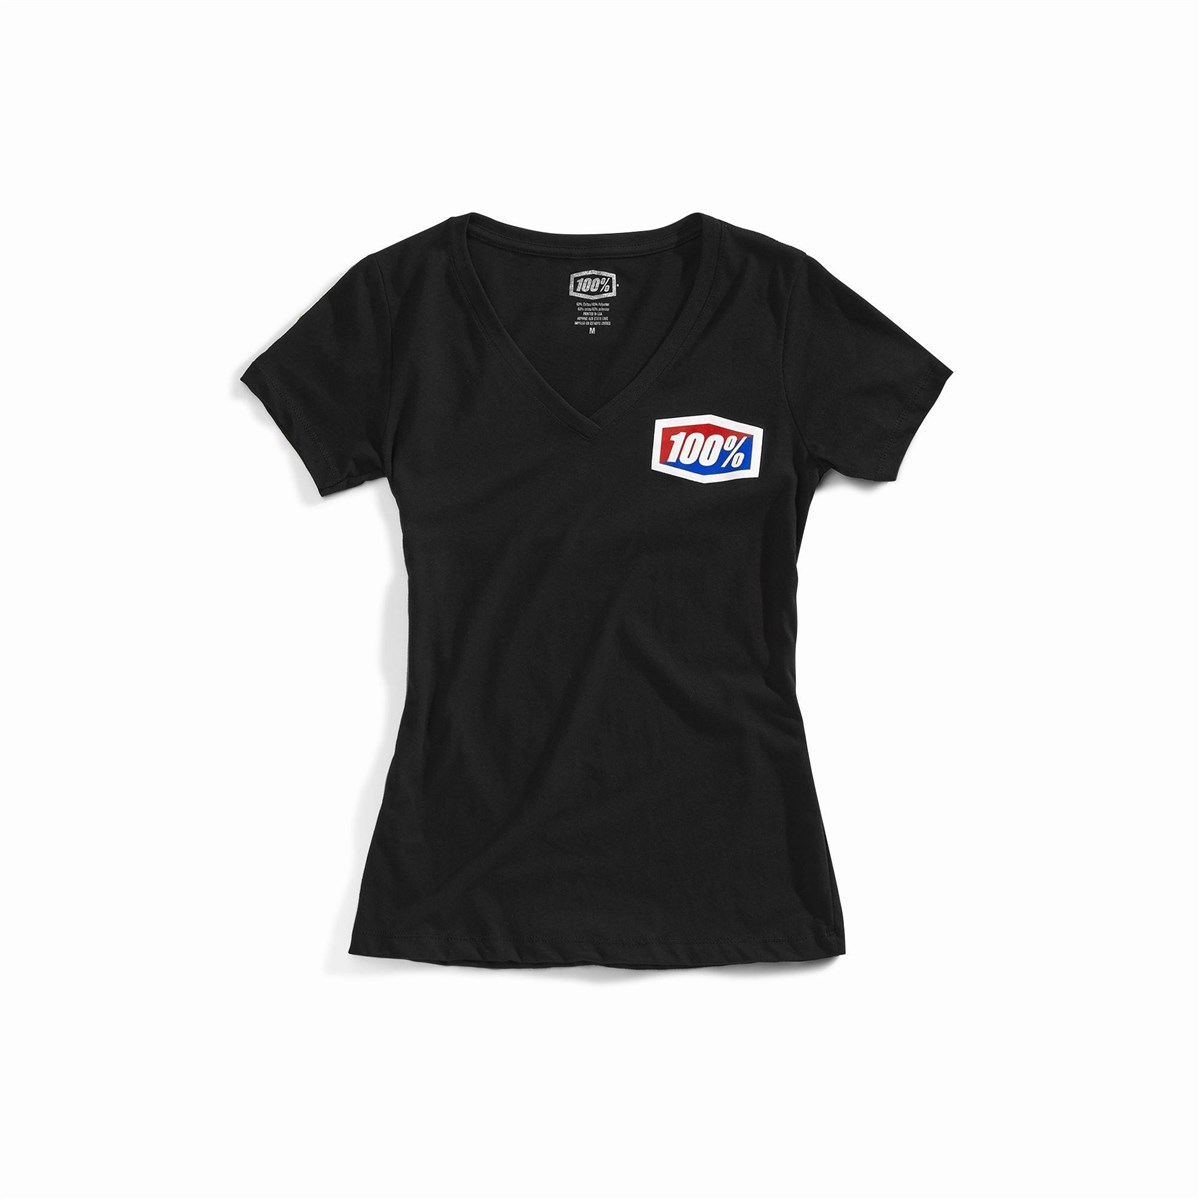 100% Official Womens T-Shirt product image